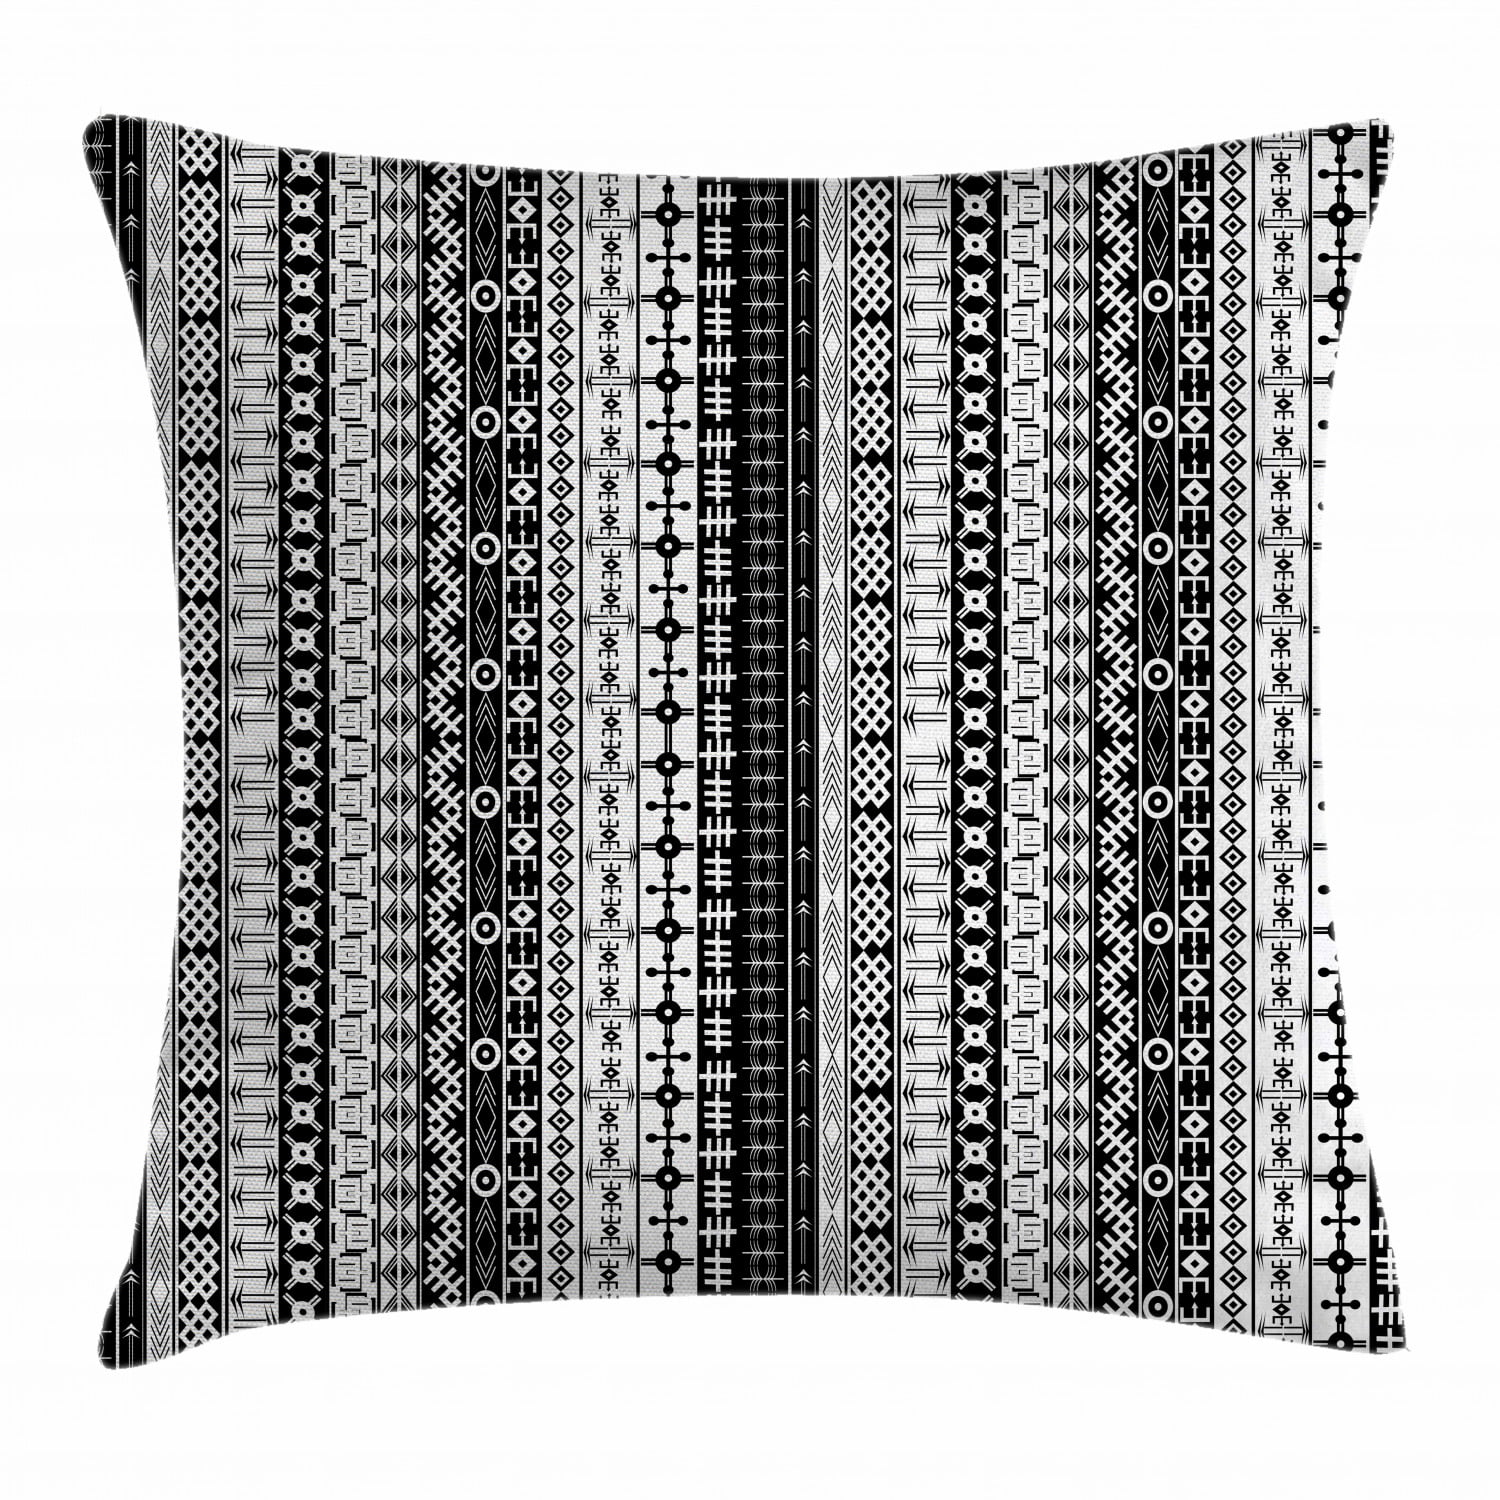 African American Tribal Pillow Covers 18 X 18 Decorative Pillows Throw Pillow Cases Protector Sofa Couch Pillows African Decor